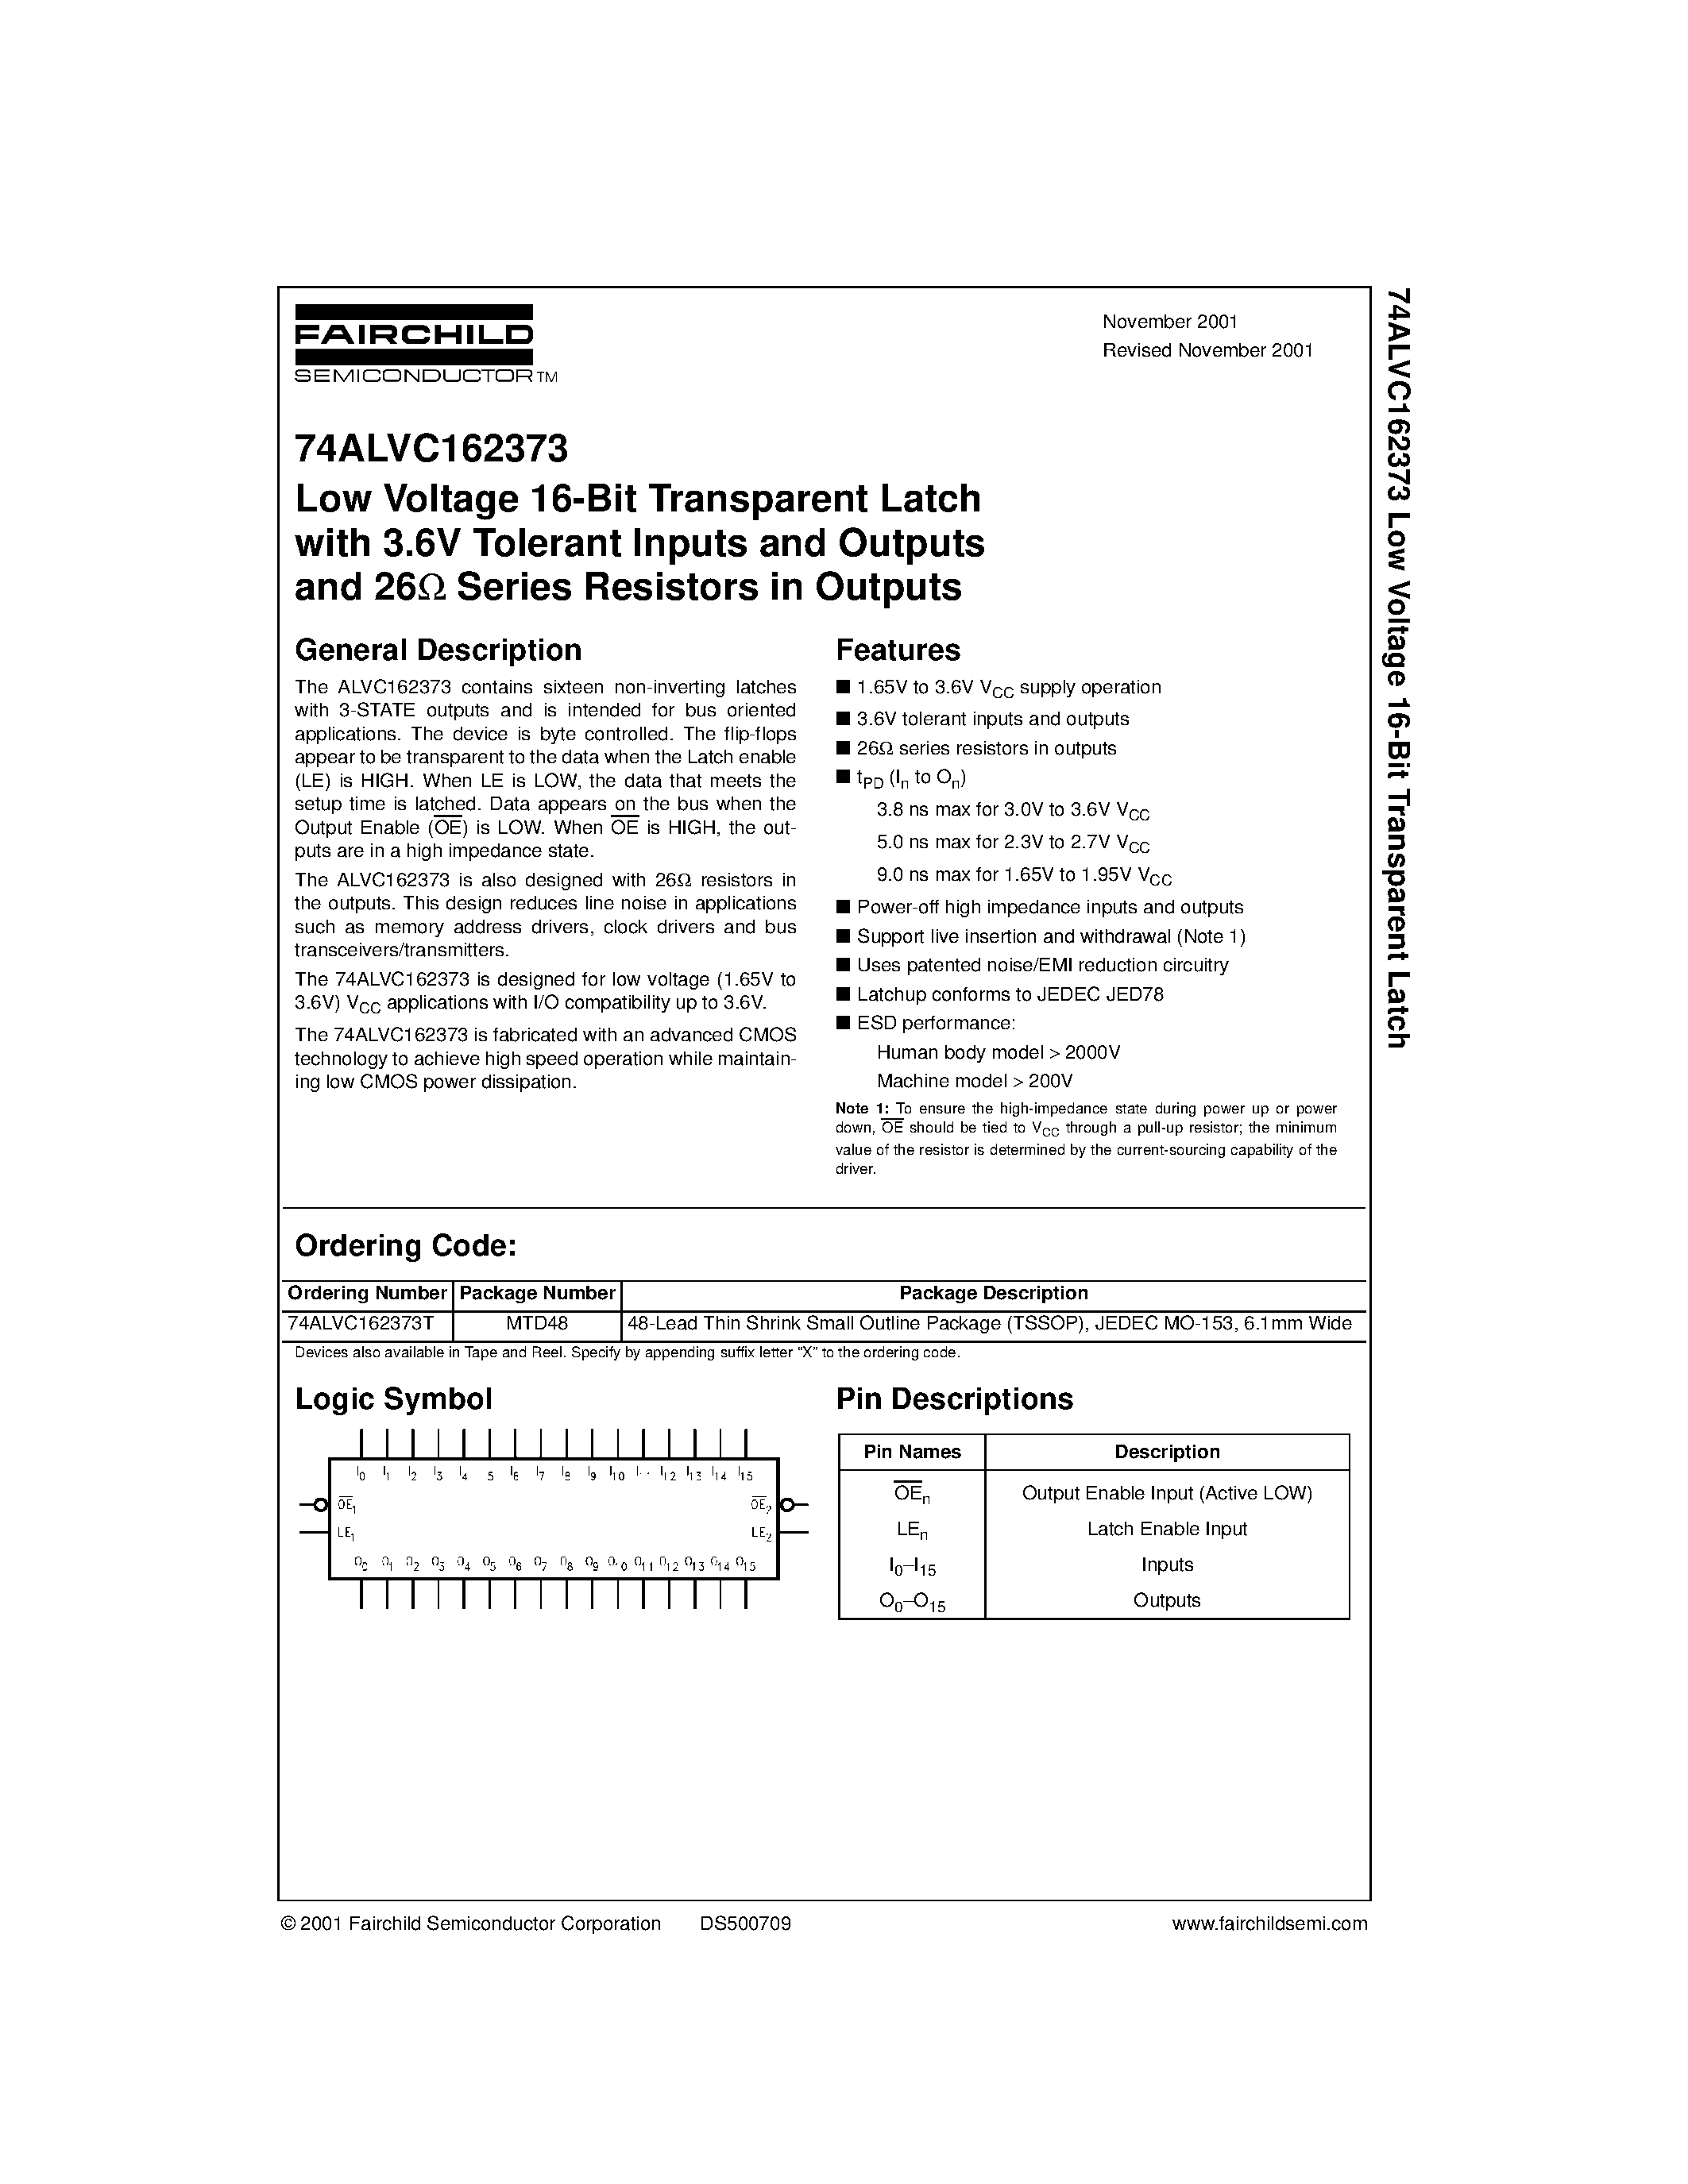 Datasheet 74ALVC162373T - Low Voltage 16-Bit Transparent Latch with 3.6V Tolerant Inputs and Outputs and 26 Series Resistors in Outputs page 1